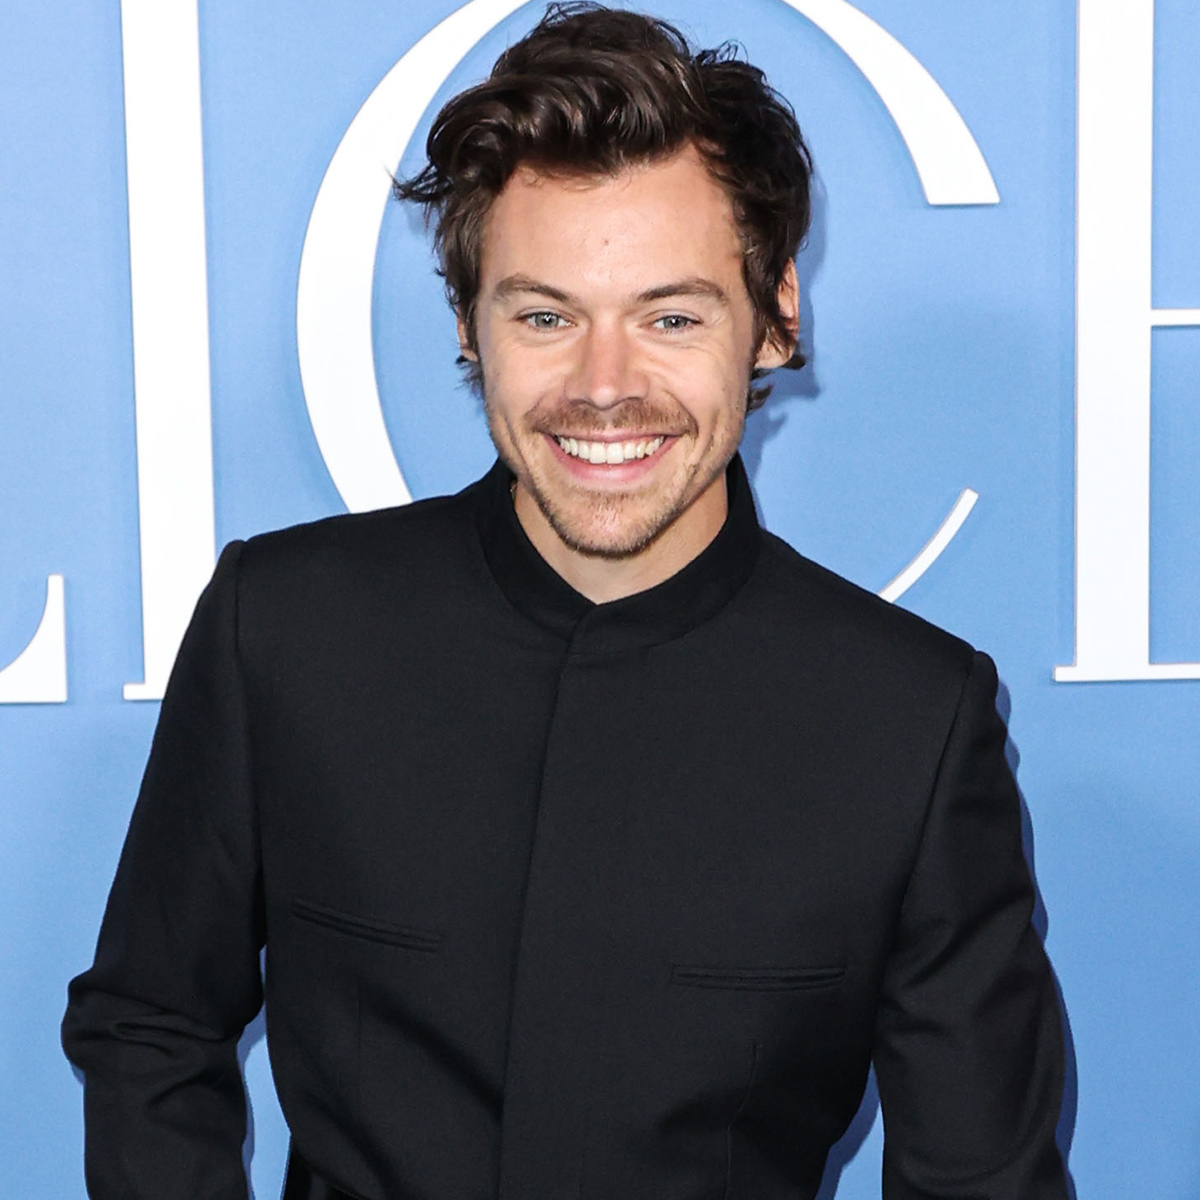 Harry Styles Says 2022 Changed My Life in Message to Fans